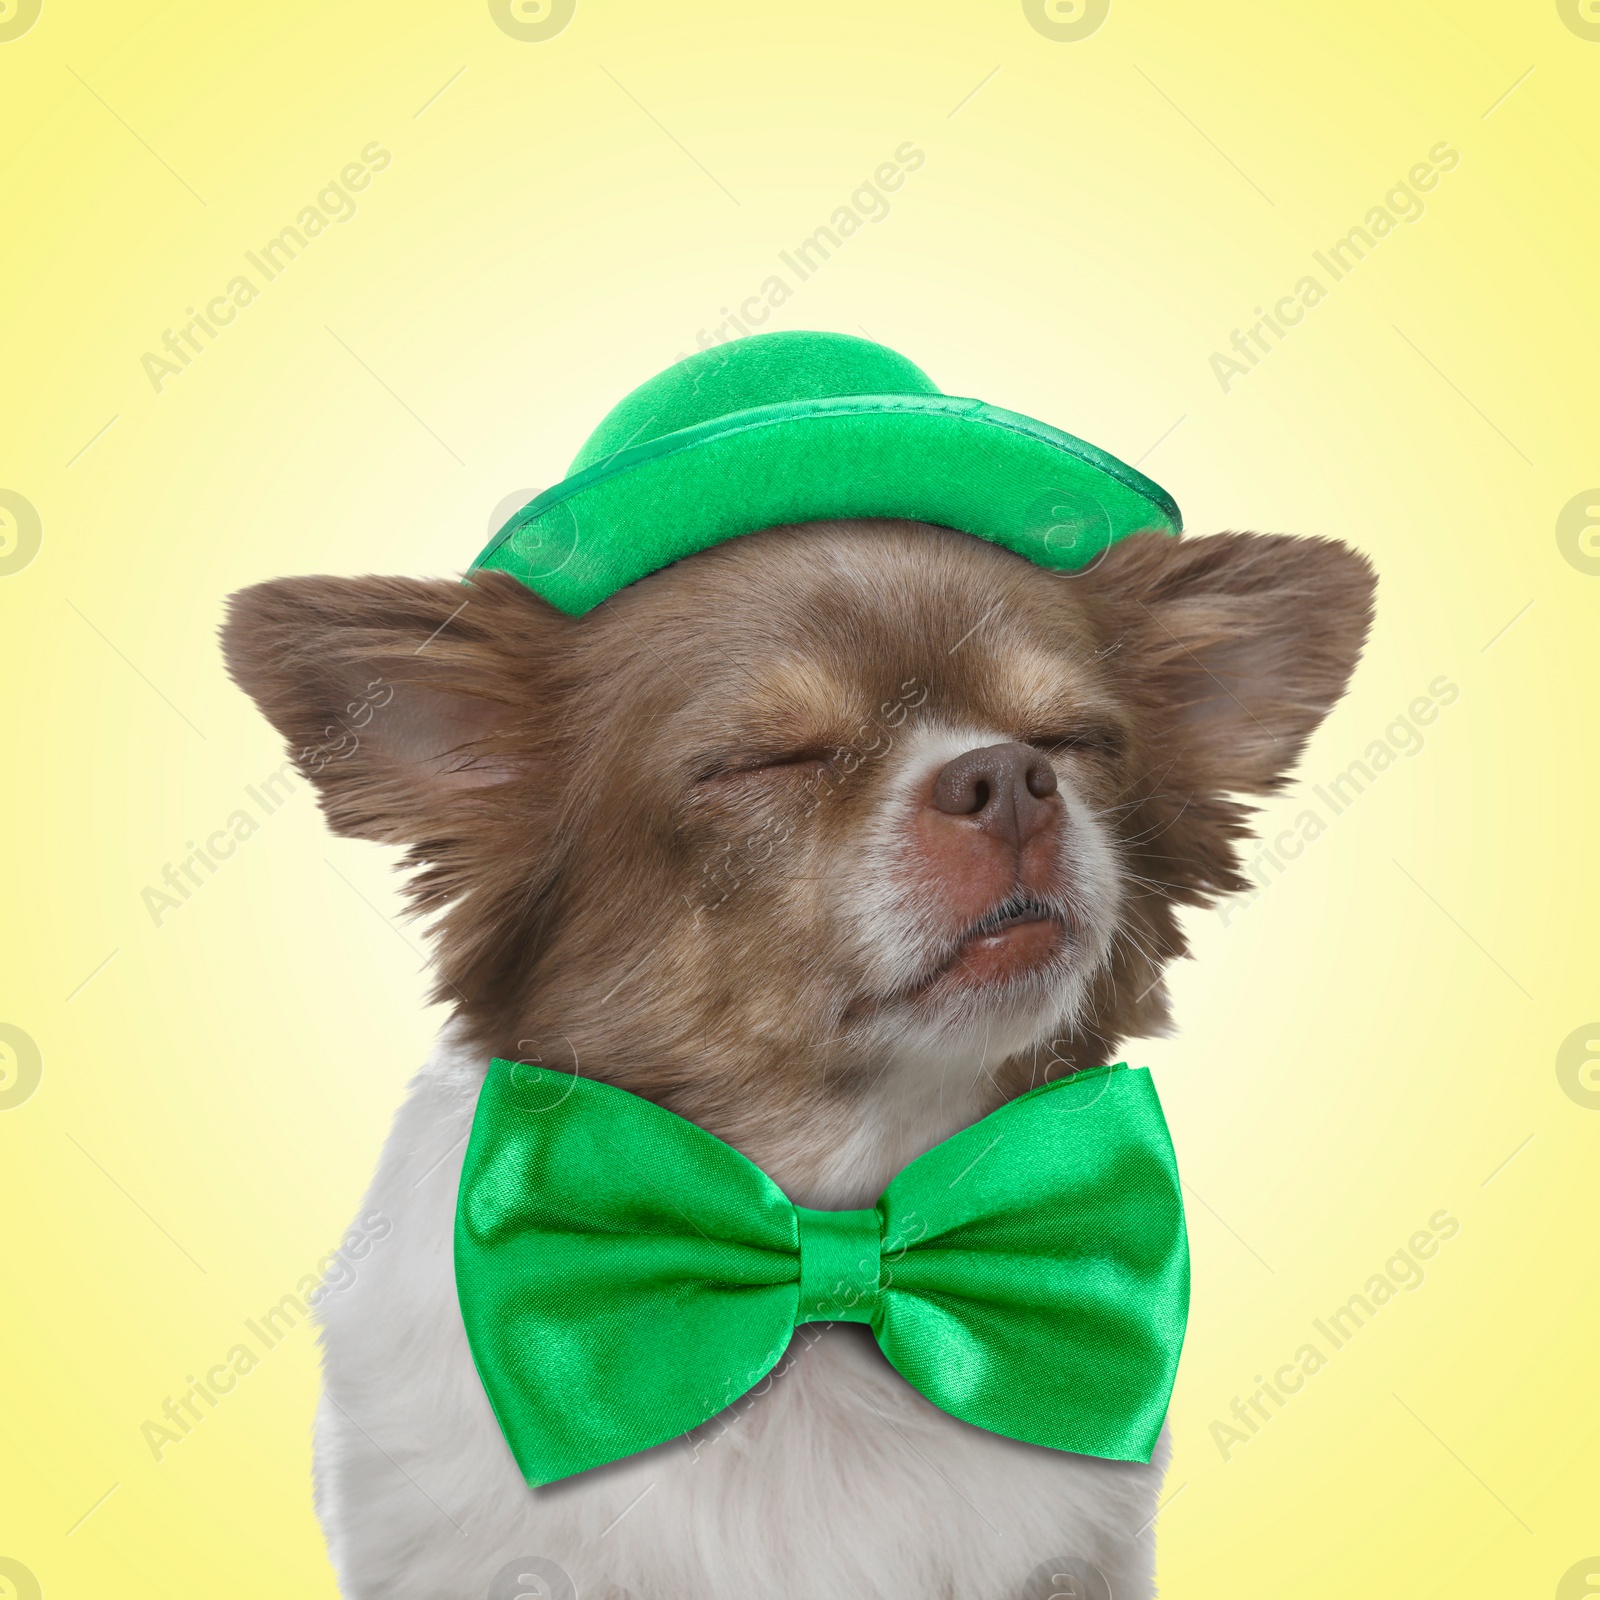 Image of St. Patrick's day celebration. Cute Chihuahua dog with green bow tie and leprechaun hat on yellow background